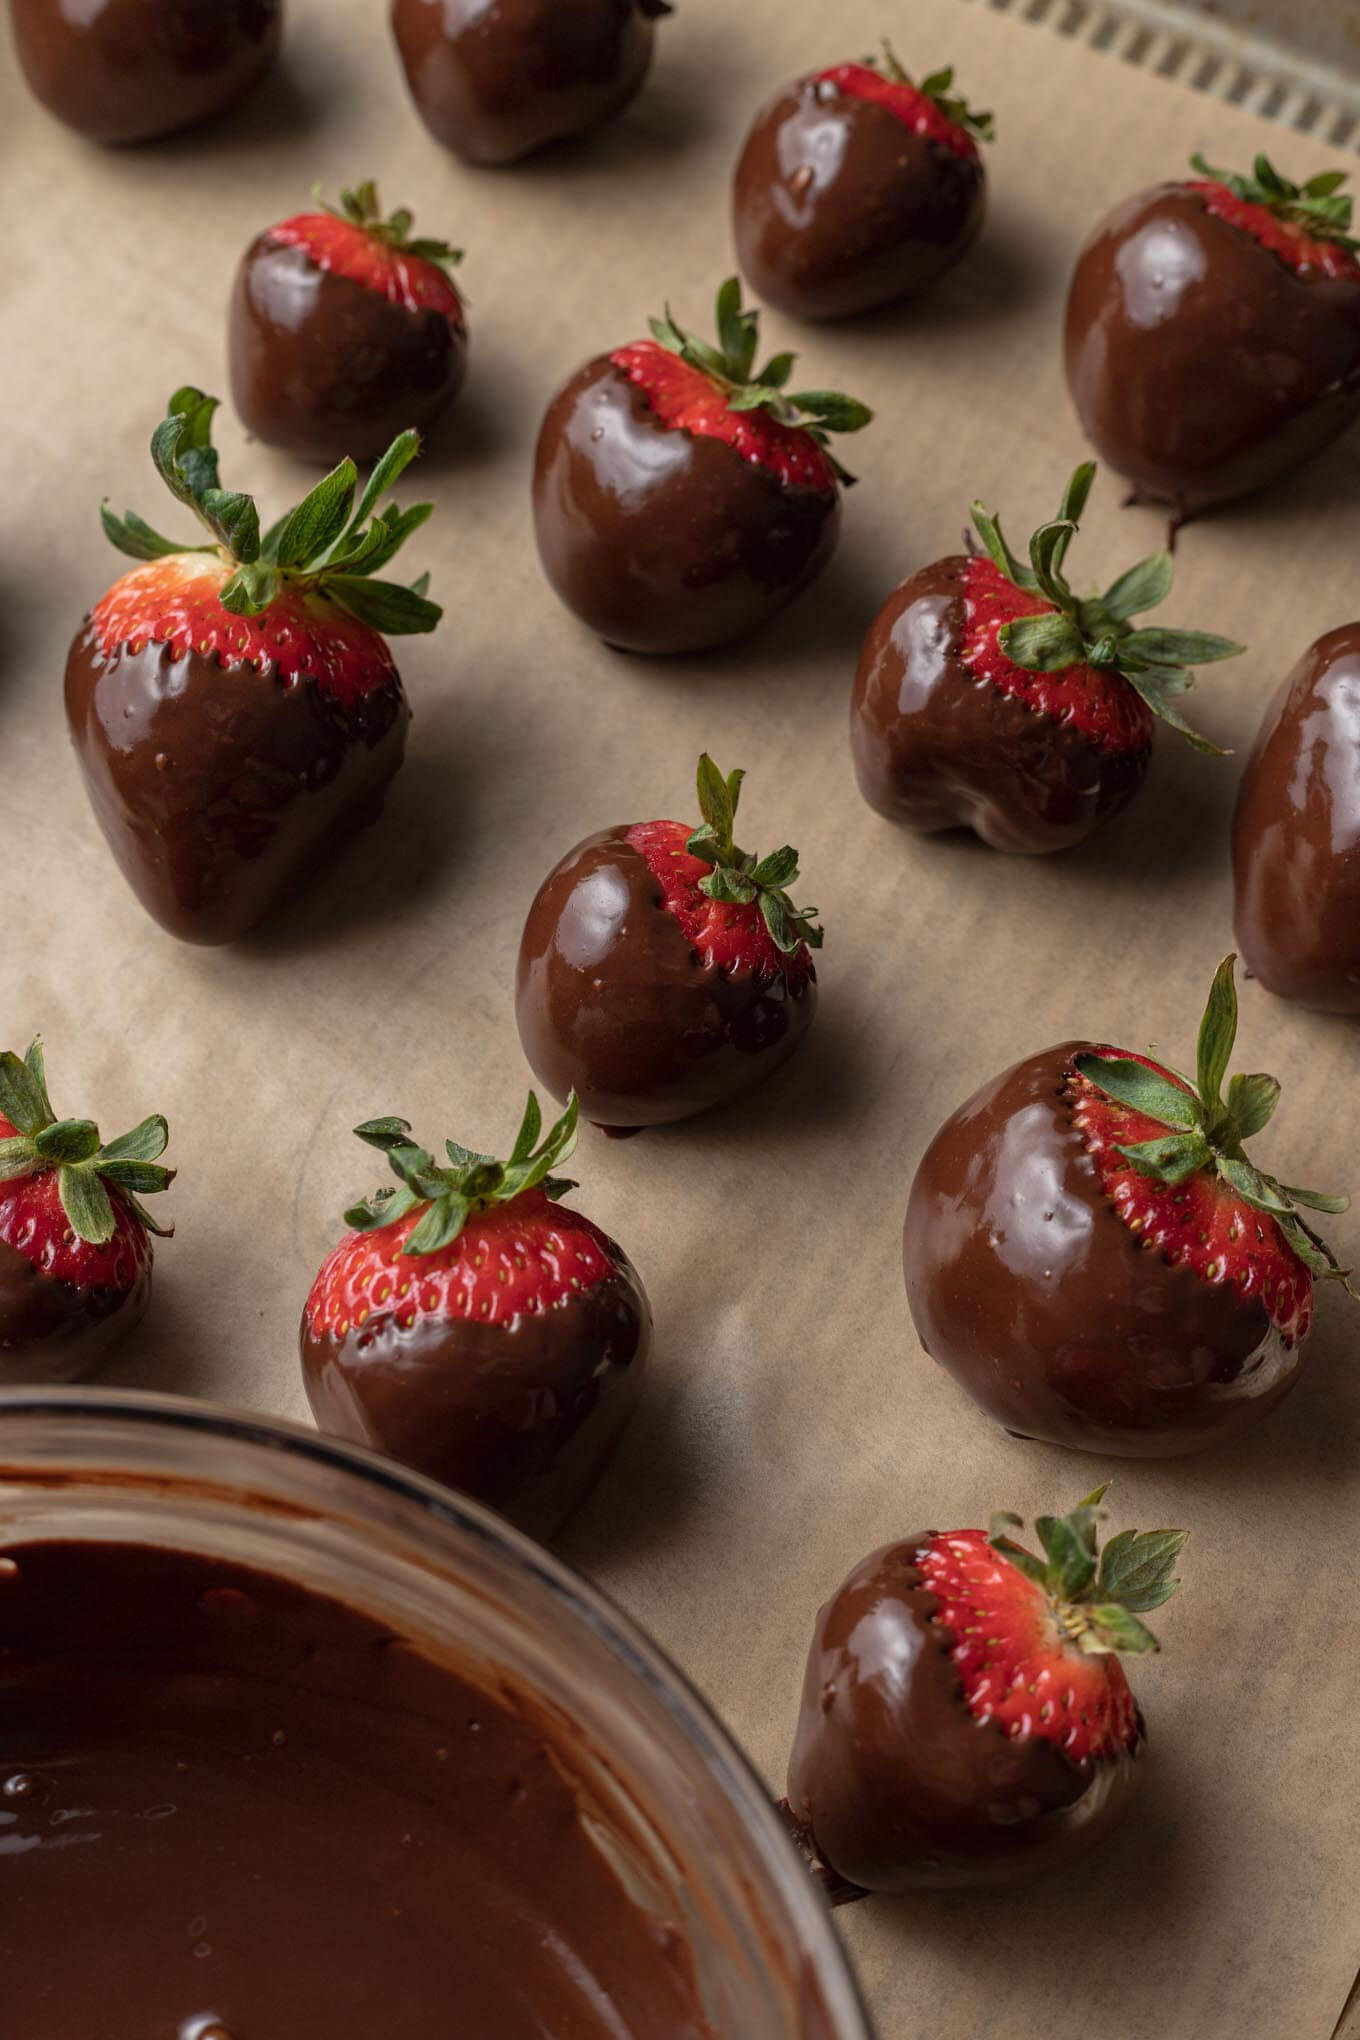 Chocolate covered strawberries on a parchment paper lined baking tray.